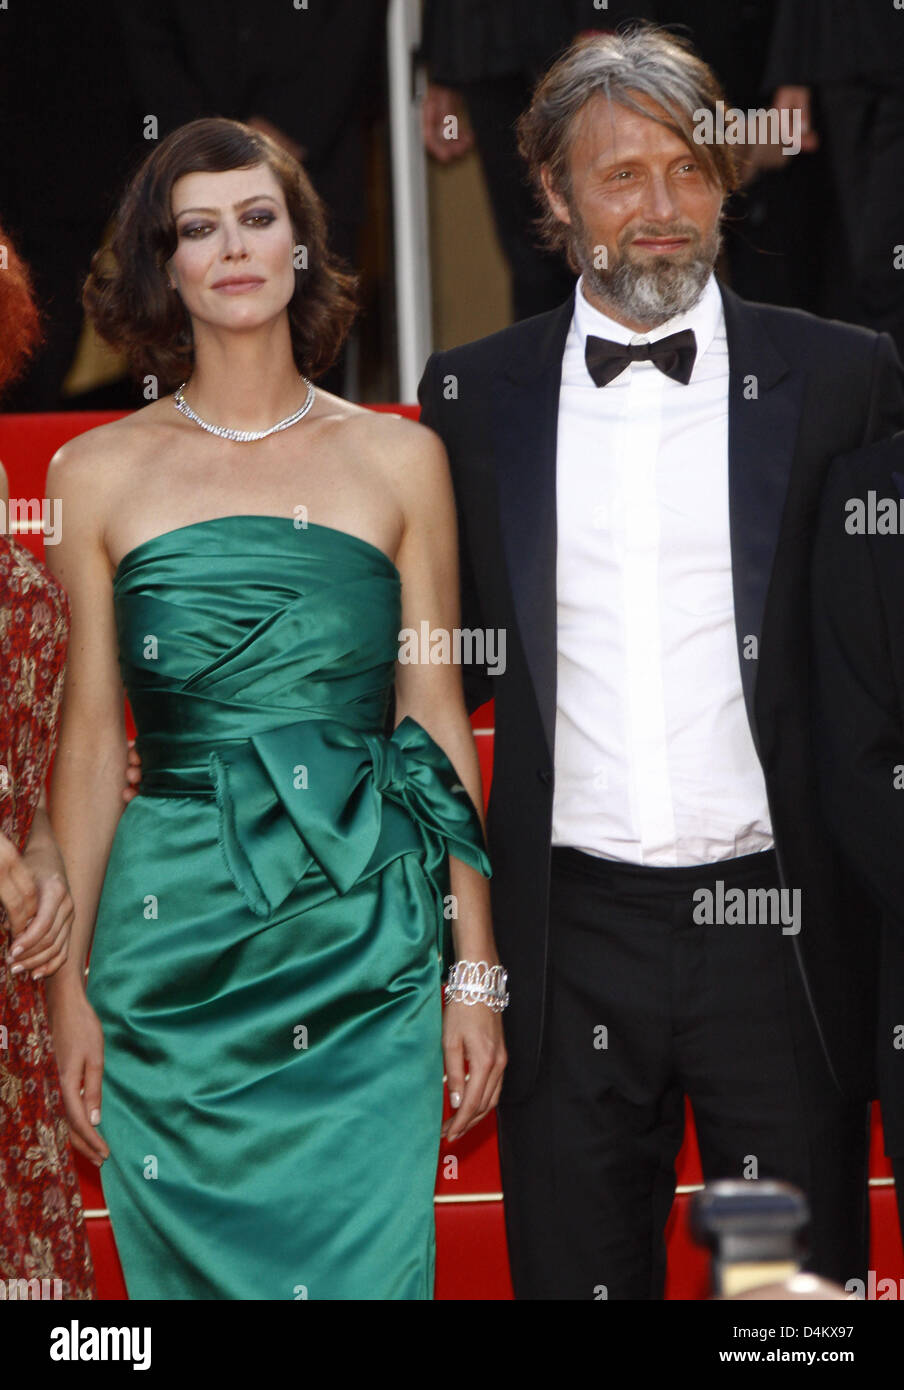 French actress Anna Mouglalis and Danish actor Mads Mikkelsen arrive for the premiere of the film ?Coco Chanel & Igor Stravinsky? during the closing night of the 2009 Cannes Film Festival in Cannes, France, 24 May 2009. Photo: Hubert Boesl Stock Photo